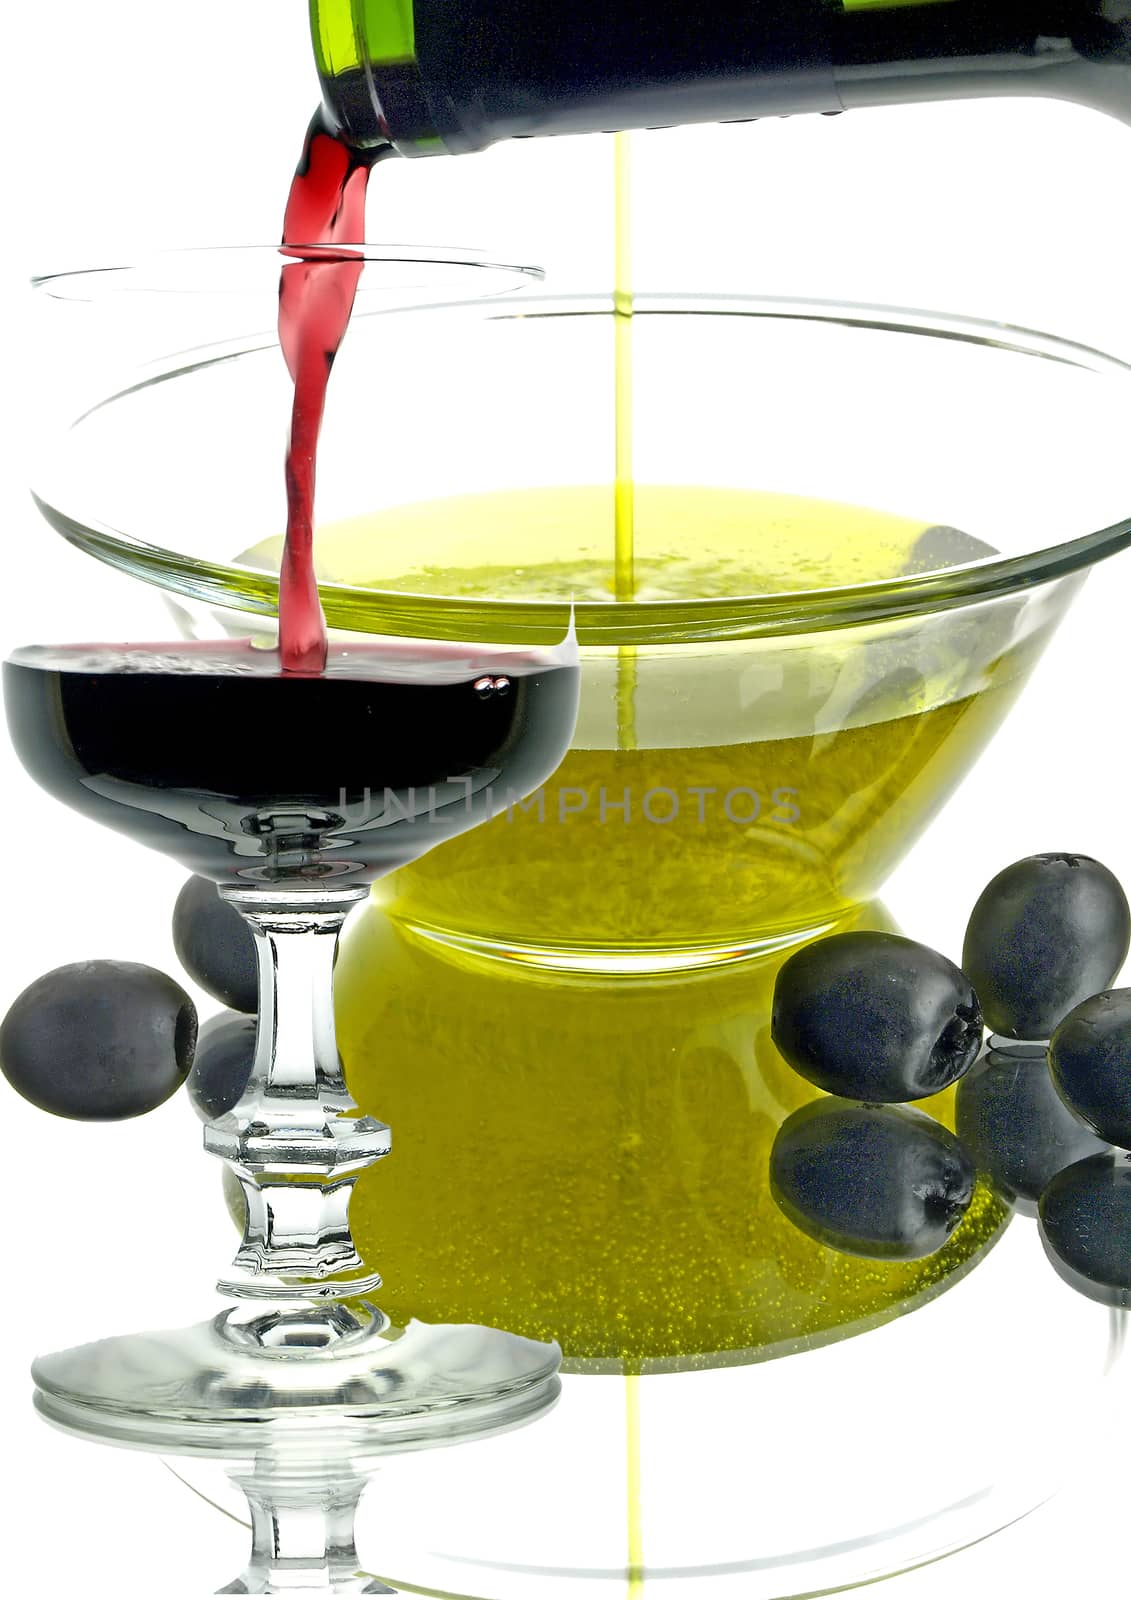 Olive oil and red wine by Jochen